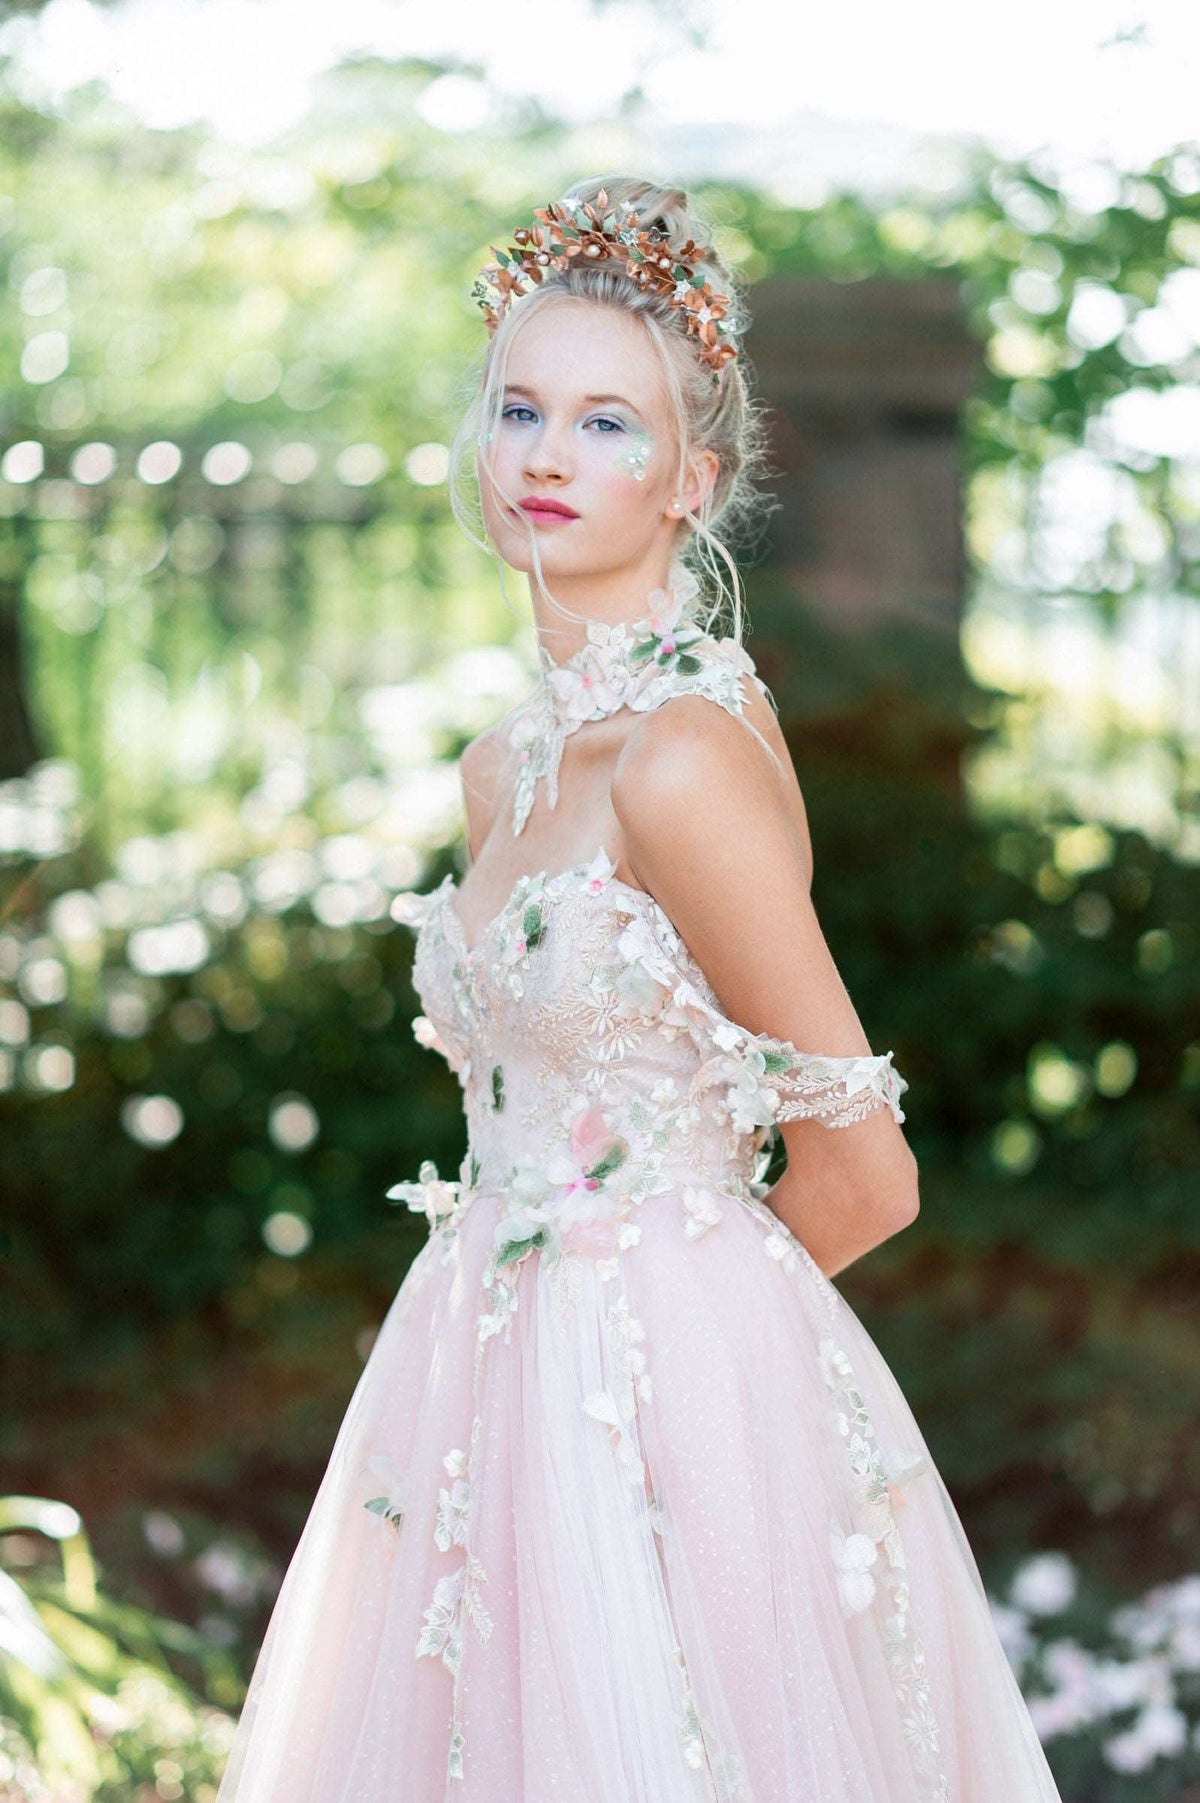 Whimsical and romantic fairy core inspired pink wedding dress for unconventionally cool brides. Custom made wedding dress by Catherine Langlois, Toronto, Canada